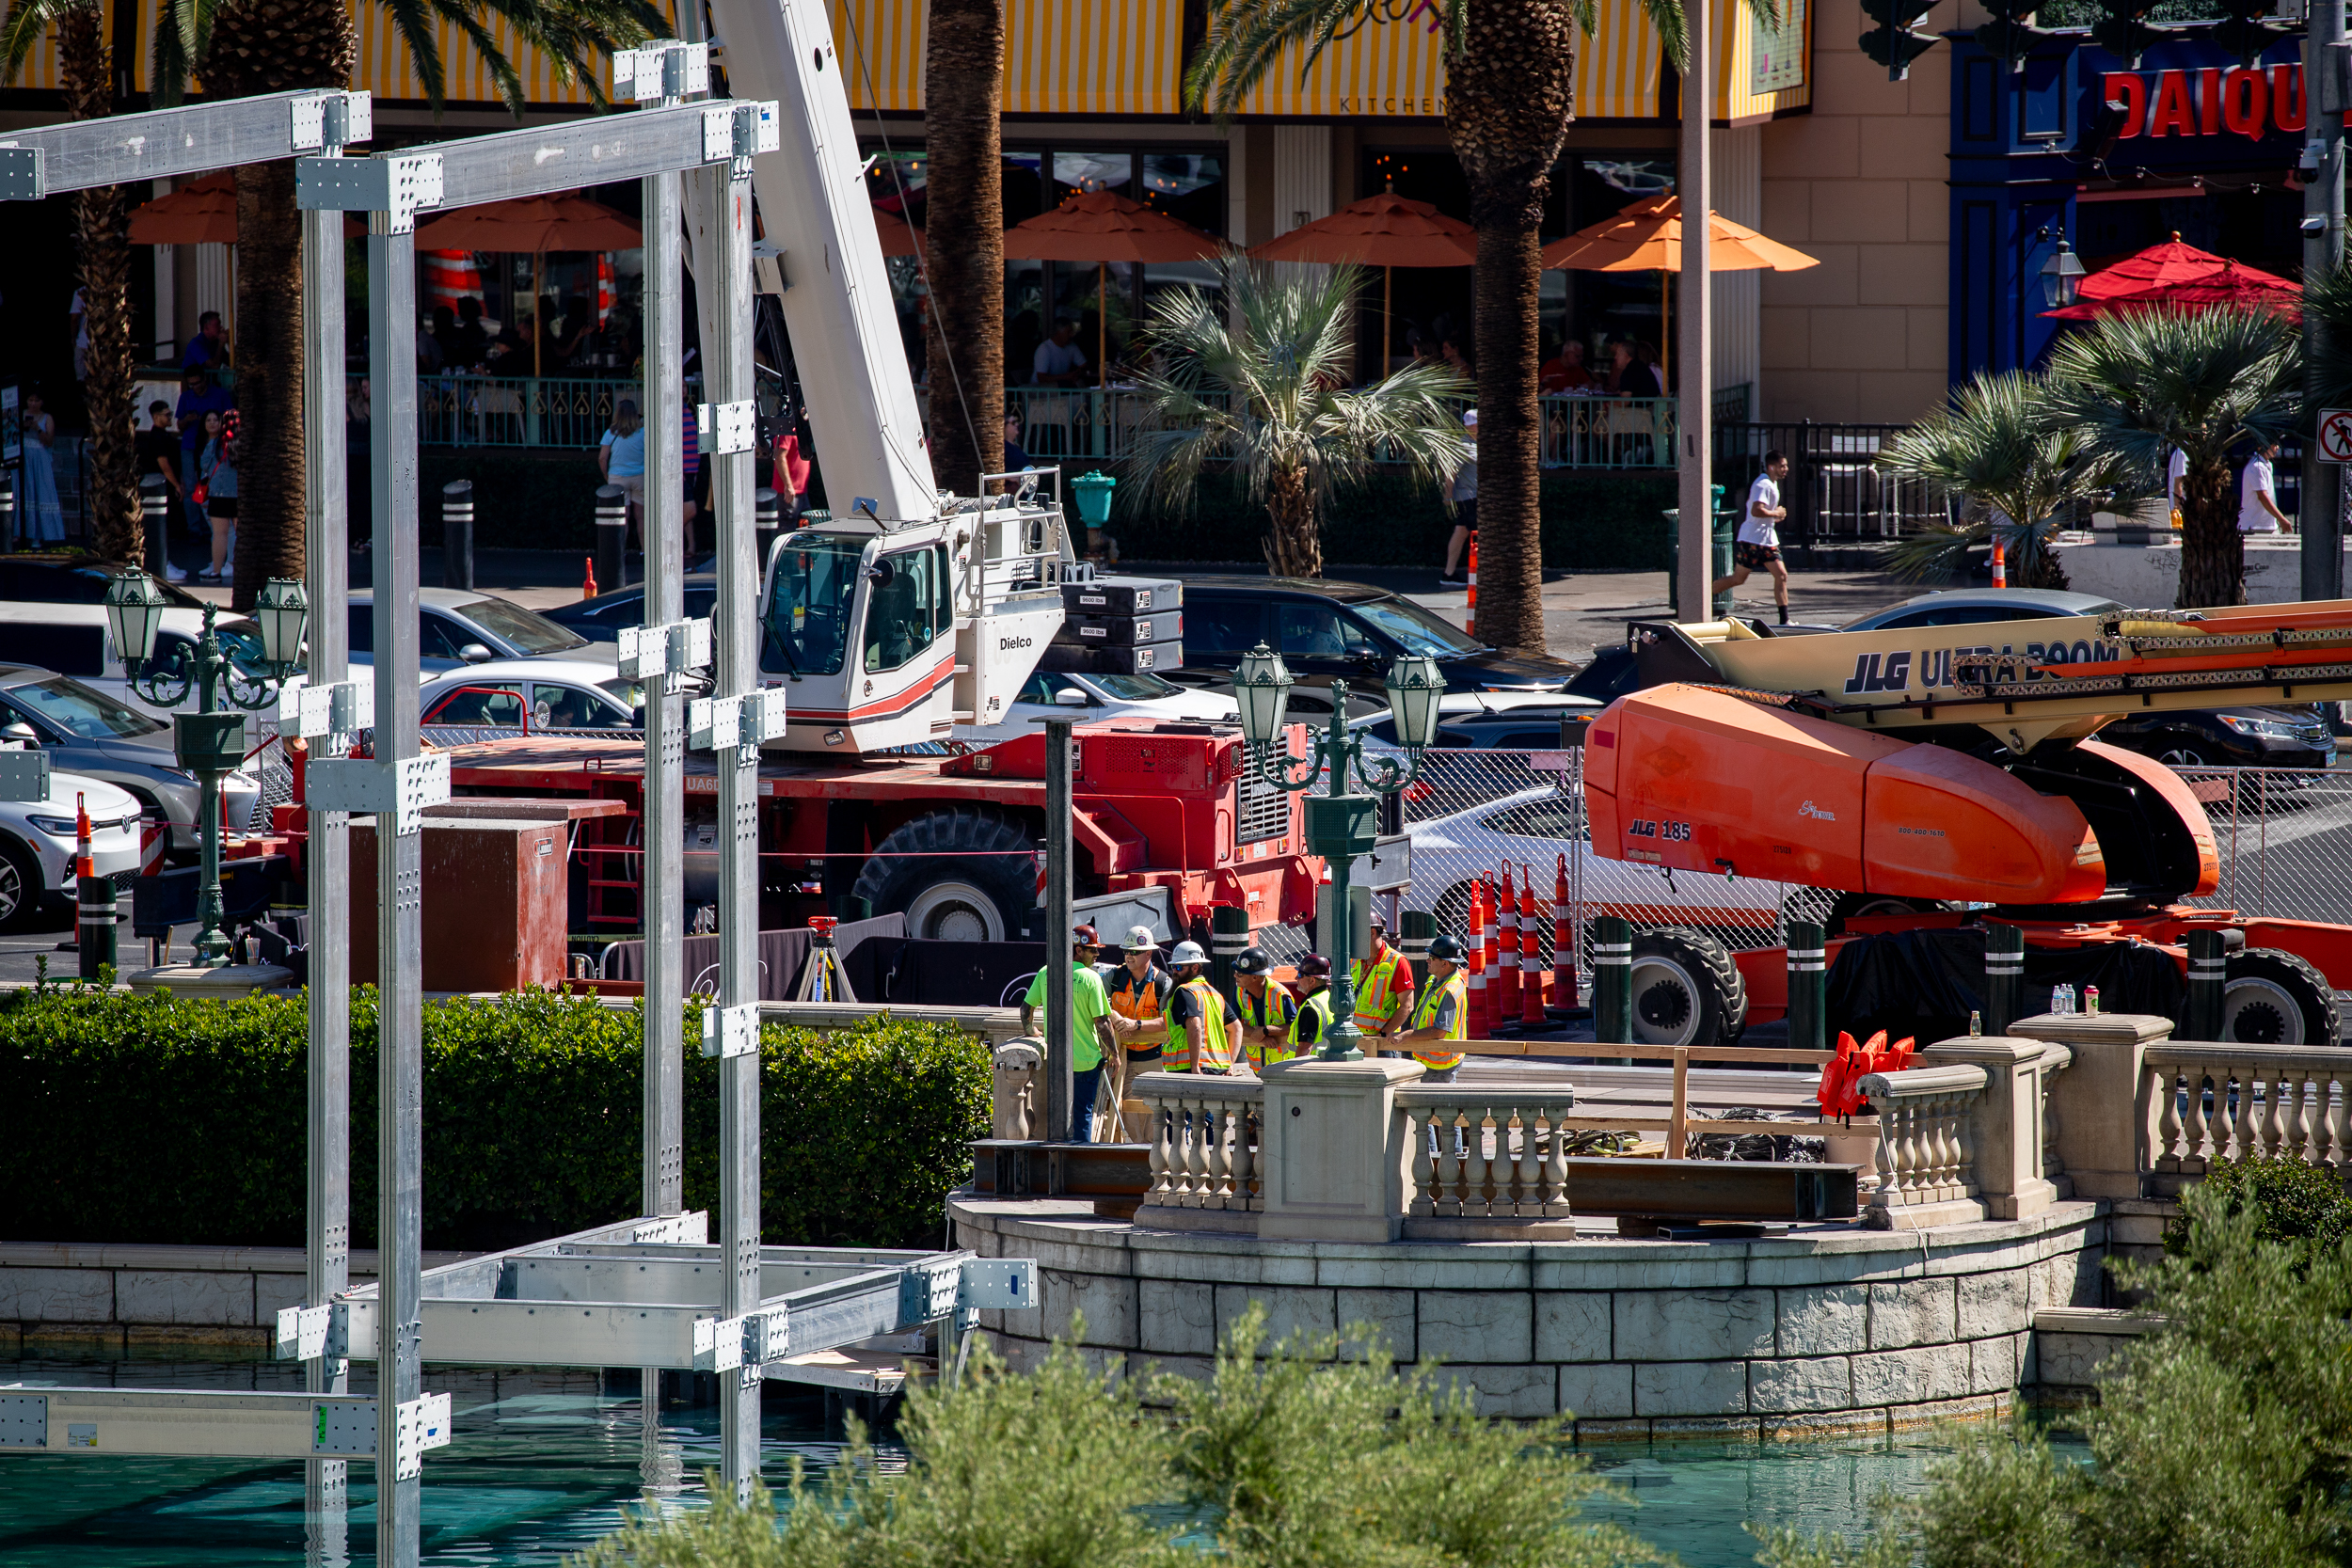 Stories From the Field - Las Vegas Paving 